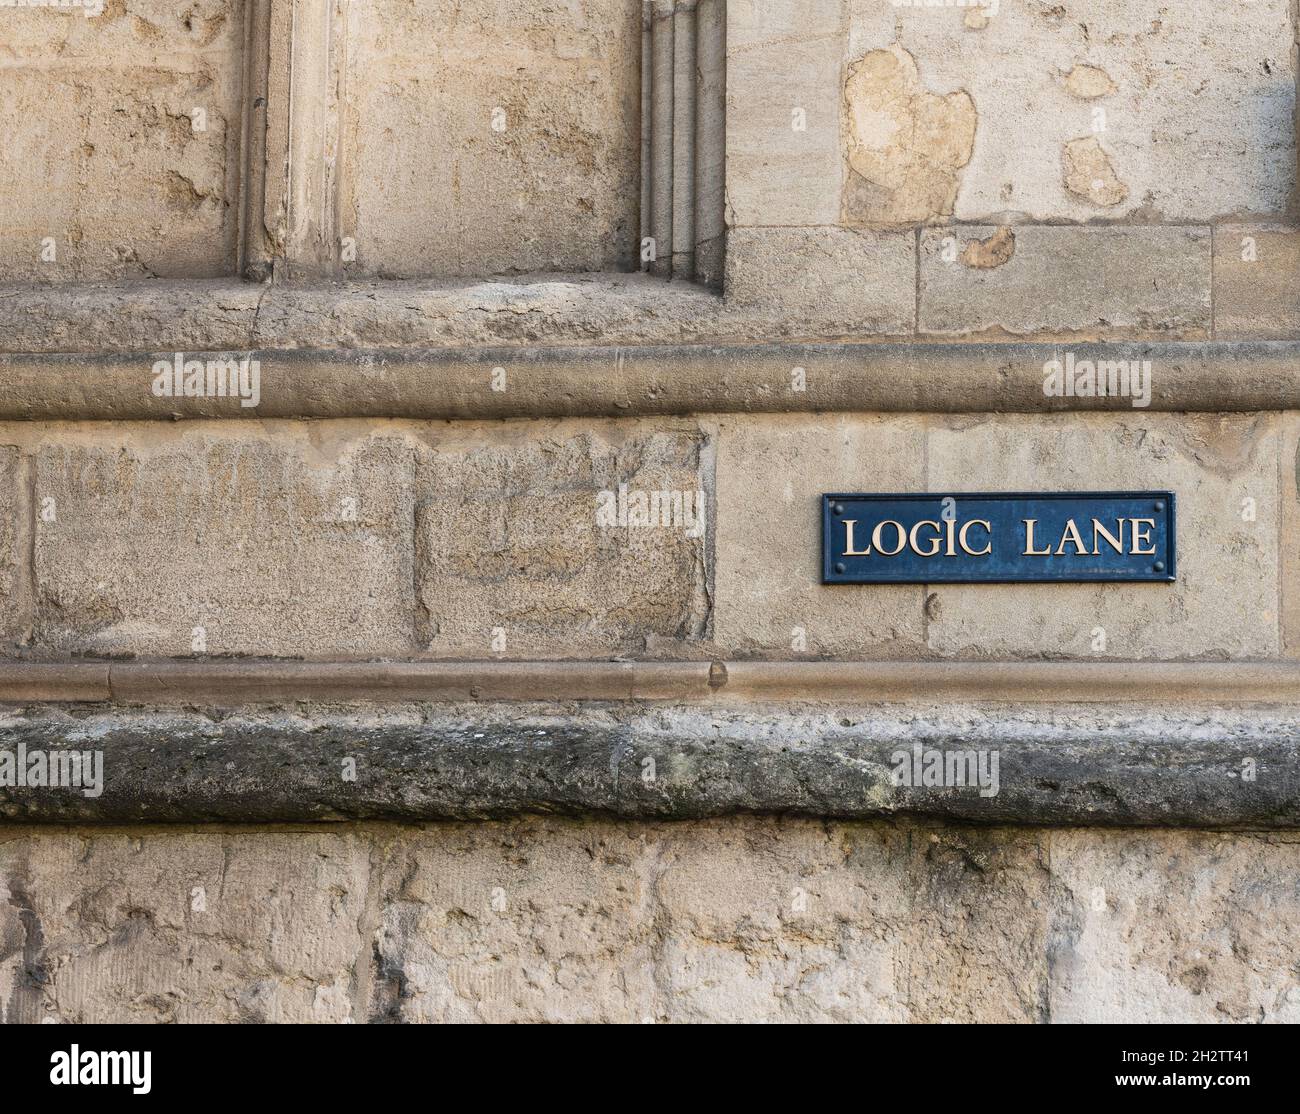 Logic Lane off the High Street by university College Oxford Oxfordshire England UK Stock Photo